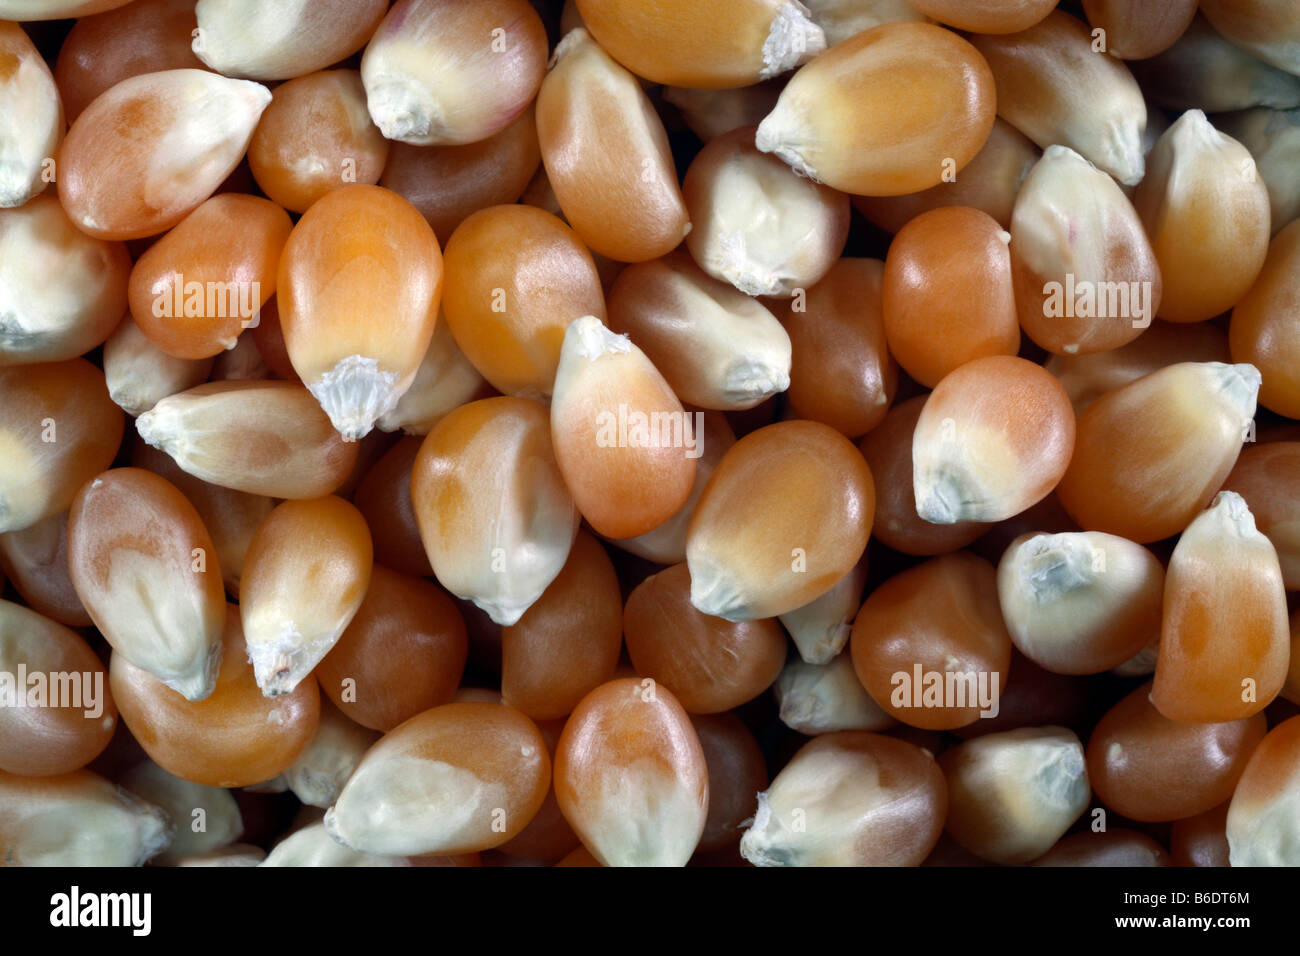 Linseed stock image. Image of eating, kernels, backgrounds - 34759773